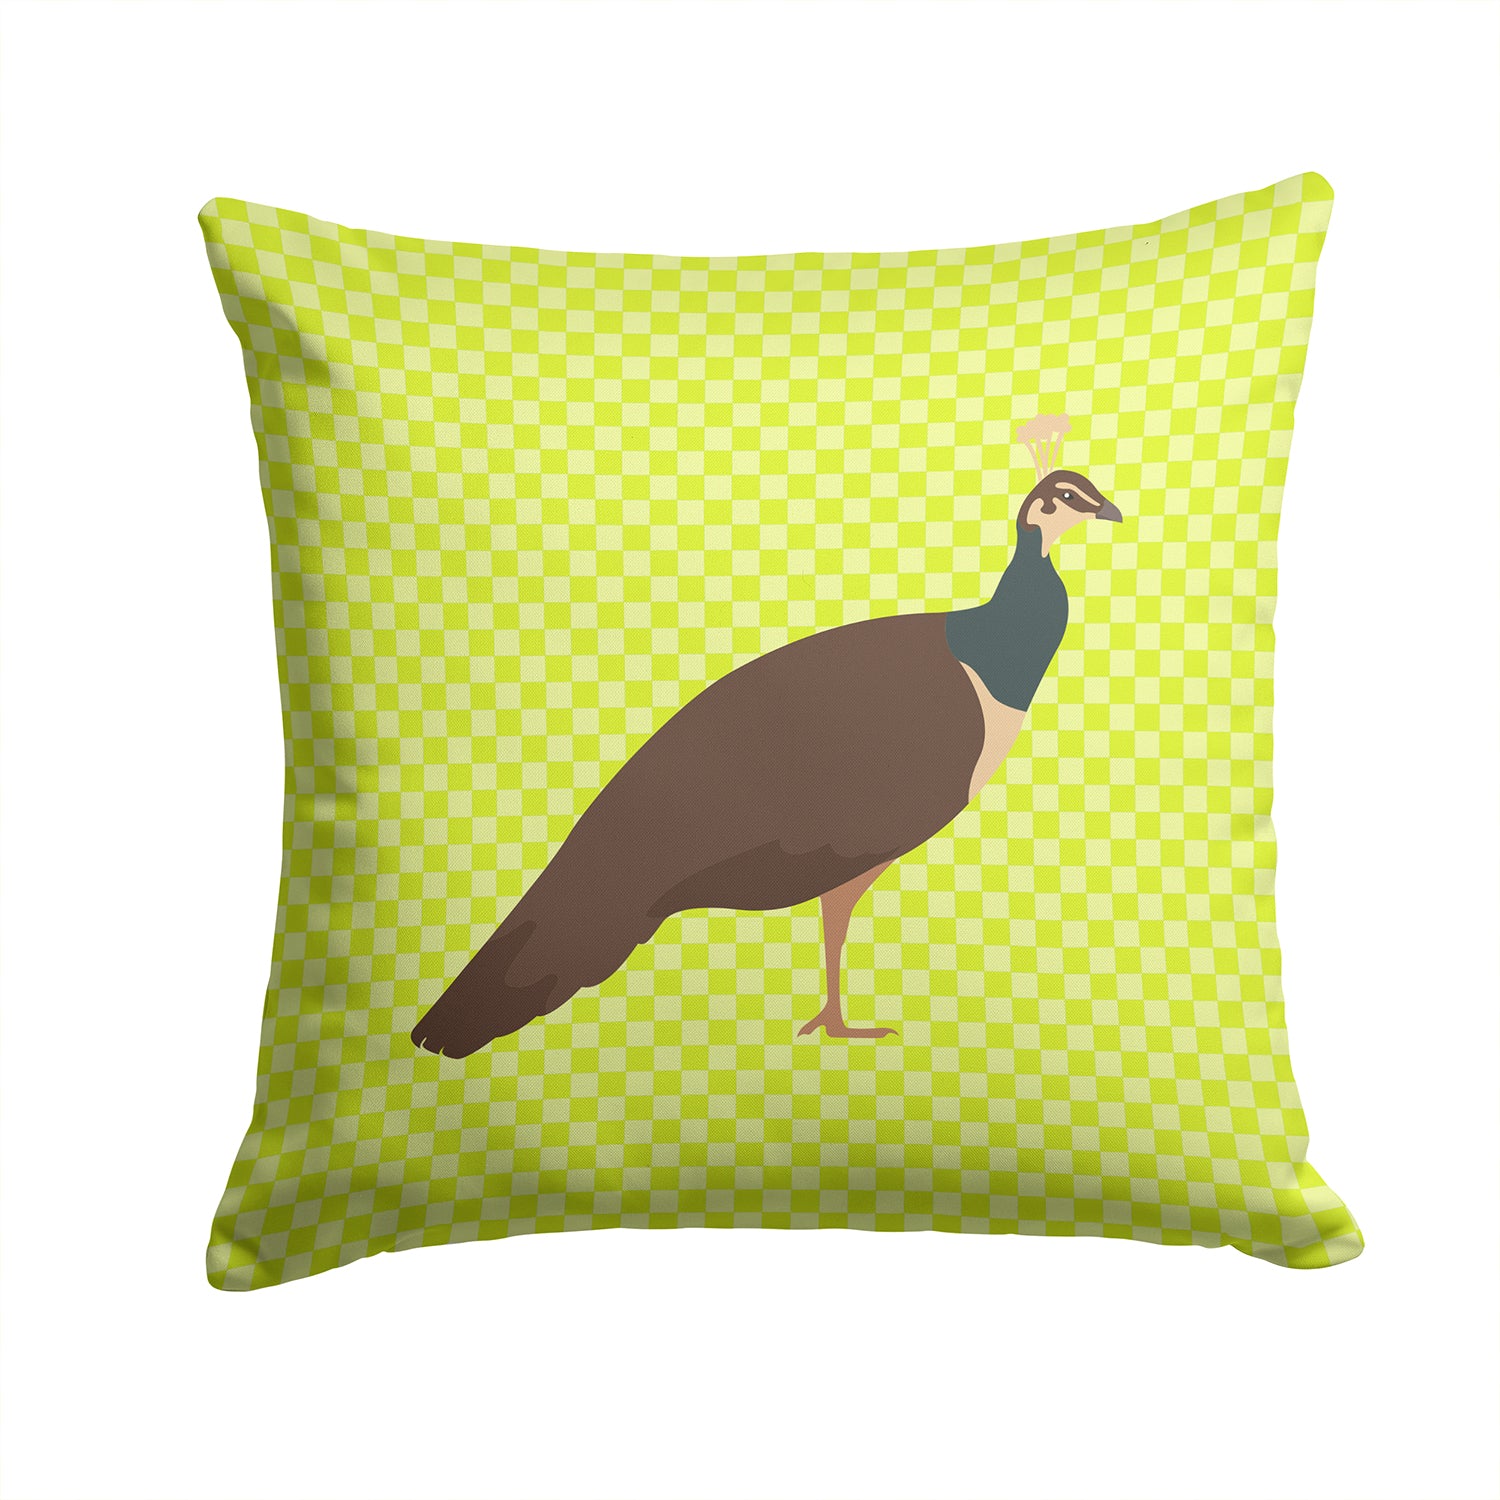 Indian Peahen Peafowl Green Fabric Decorative Pillow BB7753PW1414 - the-store.com